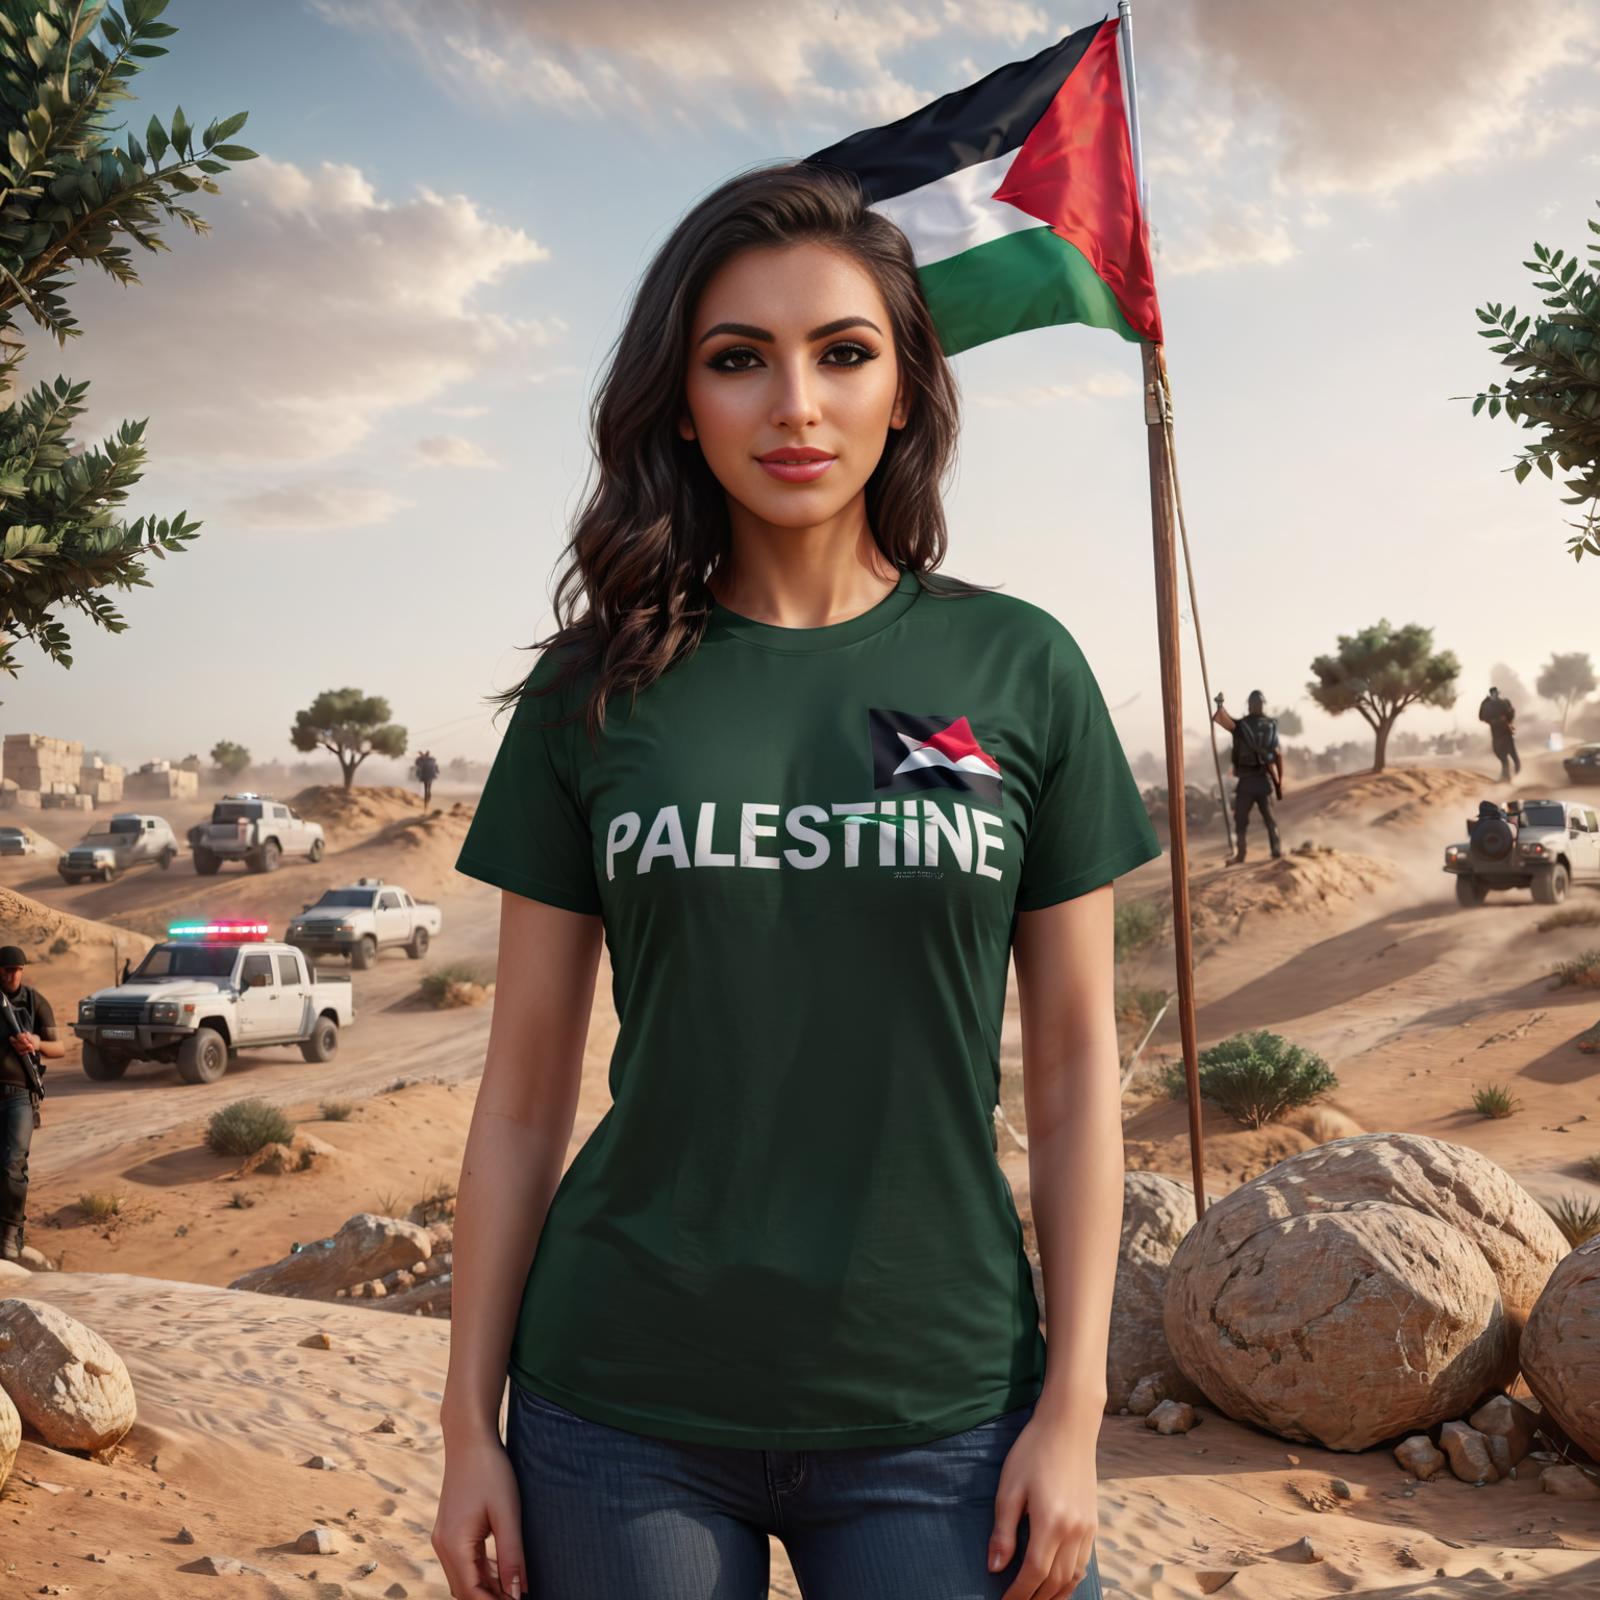 A woman wearing a Palestine shirt stands in the desert with a flag in the background.